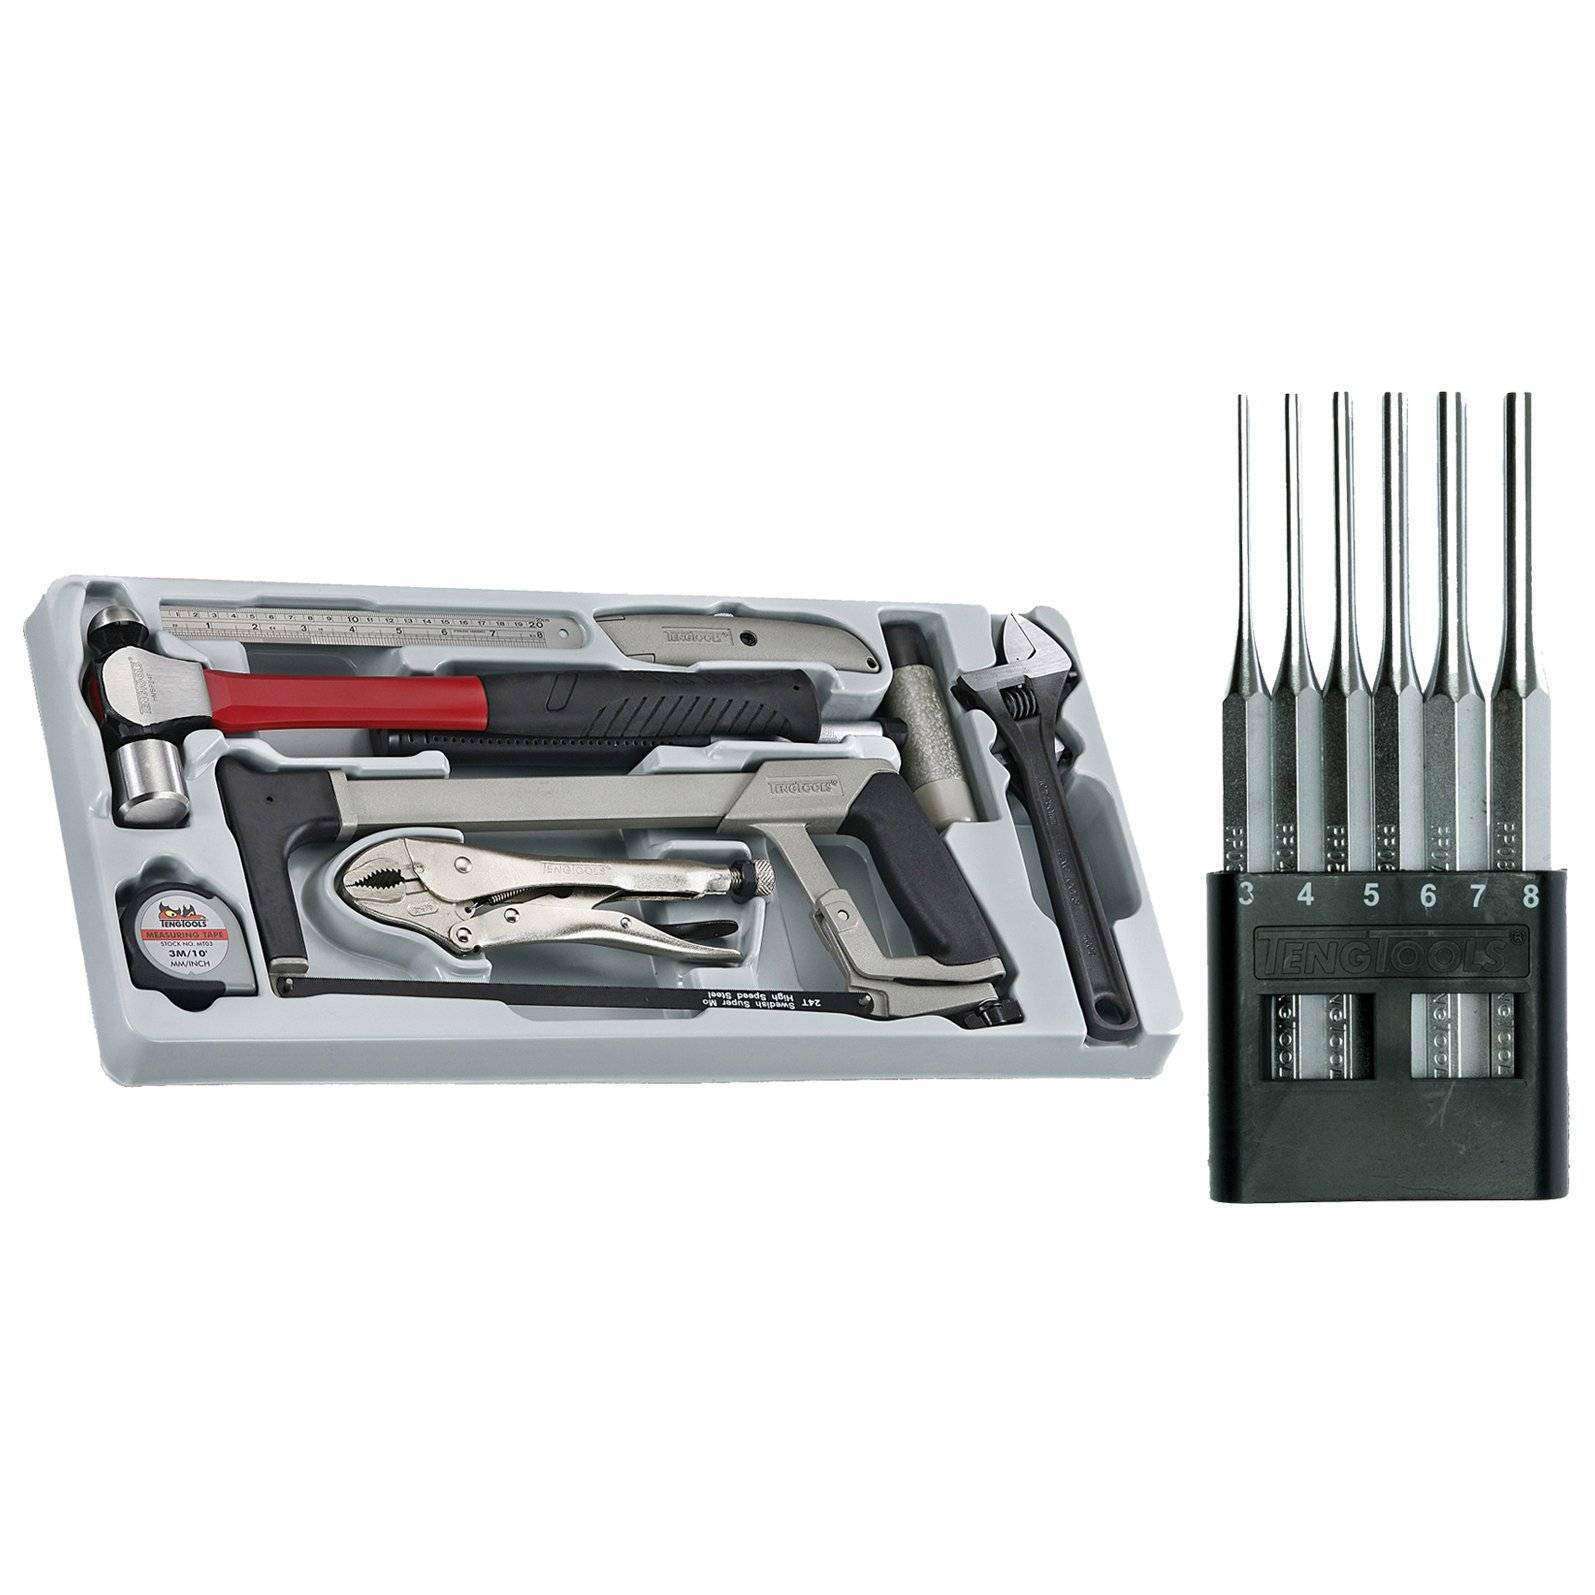 Teng Tools 15 Piece General Service Tool And Punch Set - TTPS09-KIT1